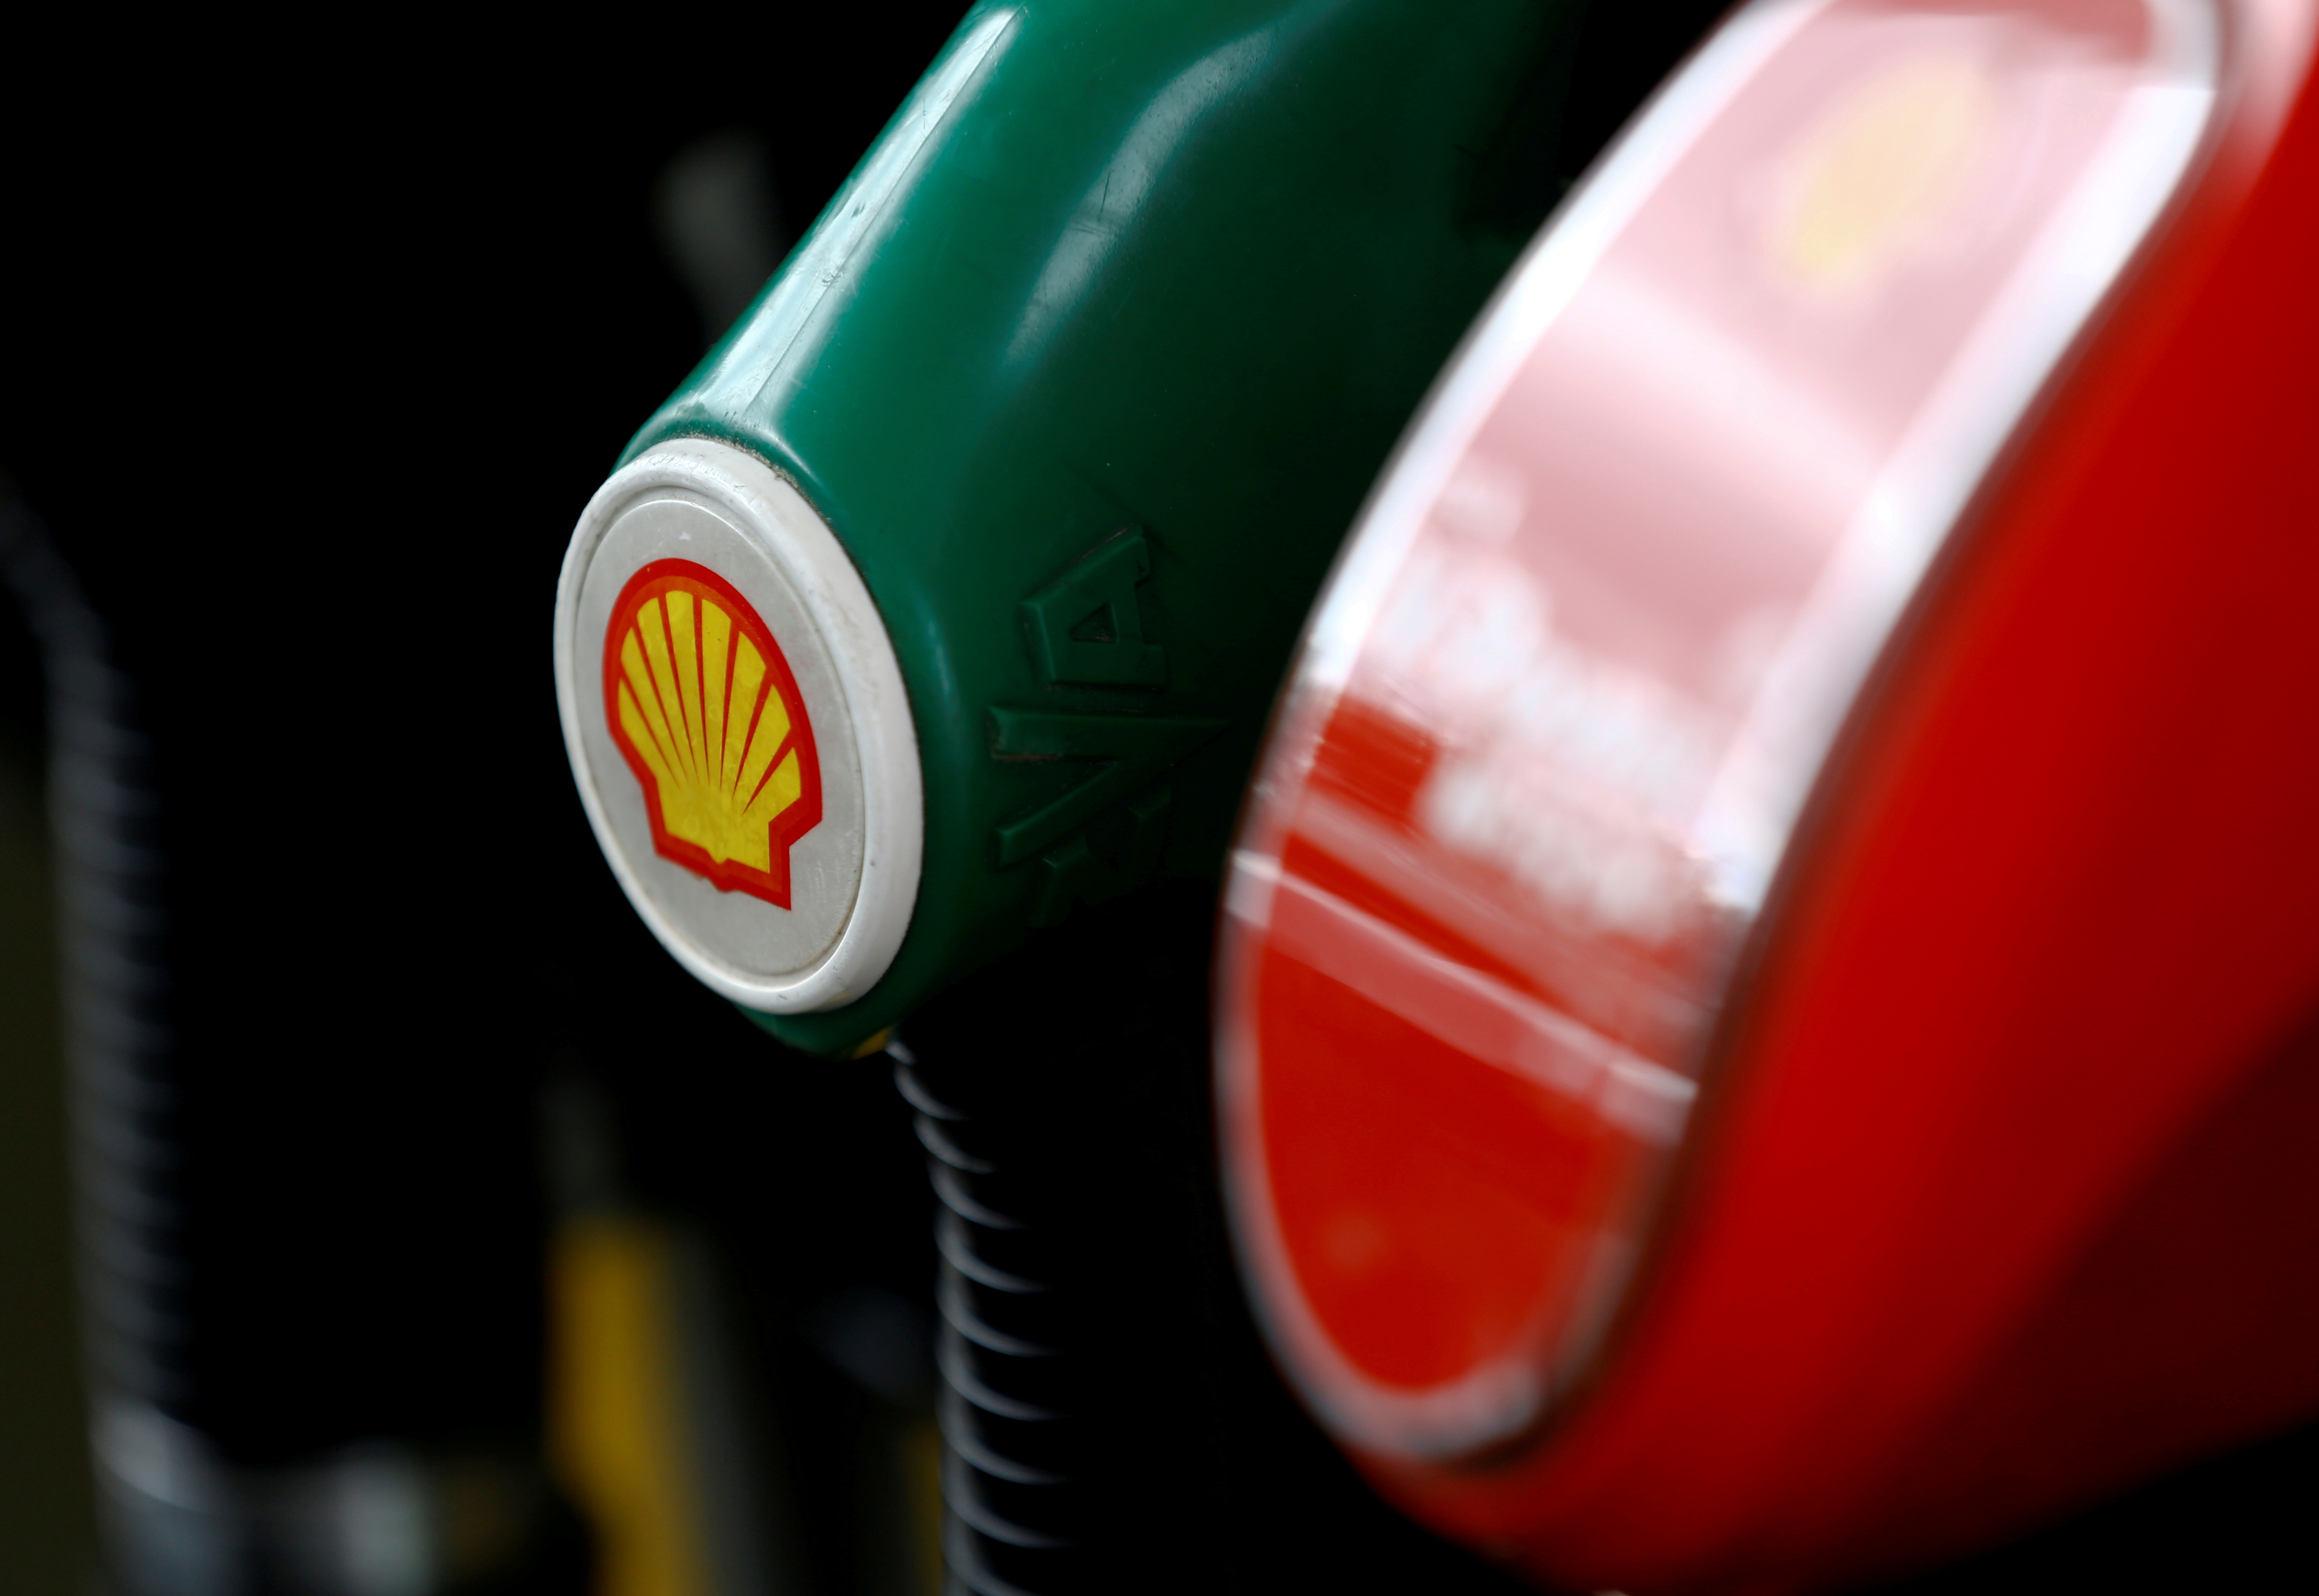 A Shell logo is seen on a fuel pump at a gas station In Warsaw, Poland June 1, 2017. REUTERS/Kacper Pempel/File Photo  